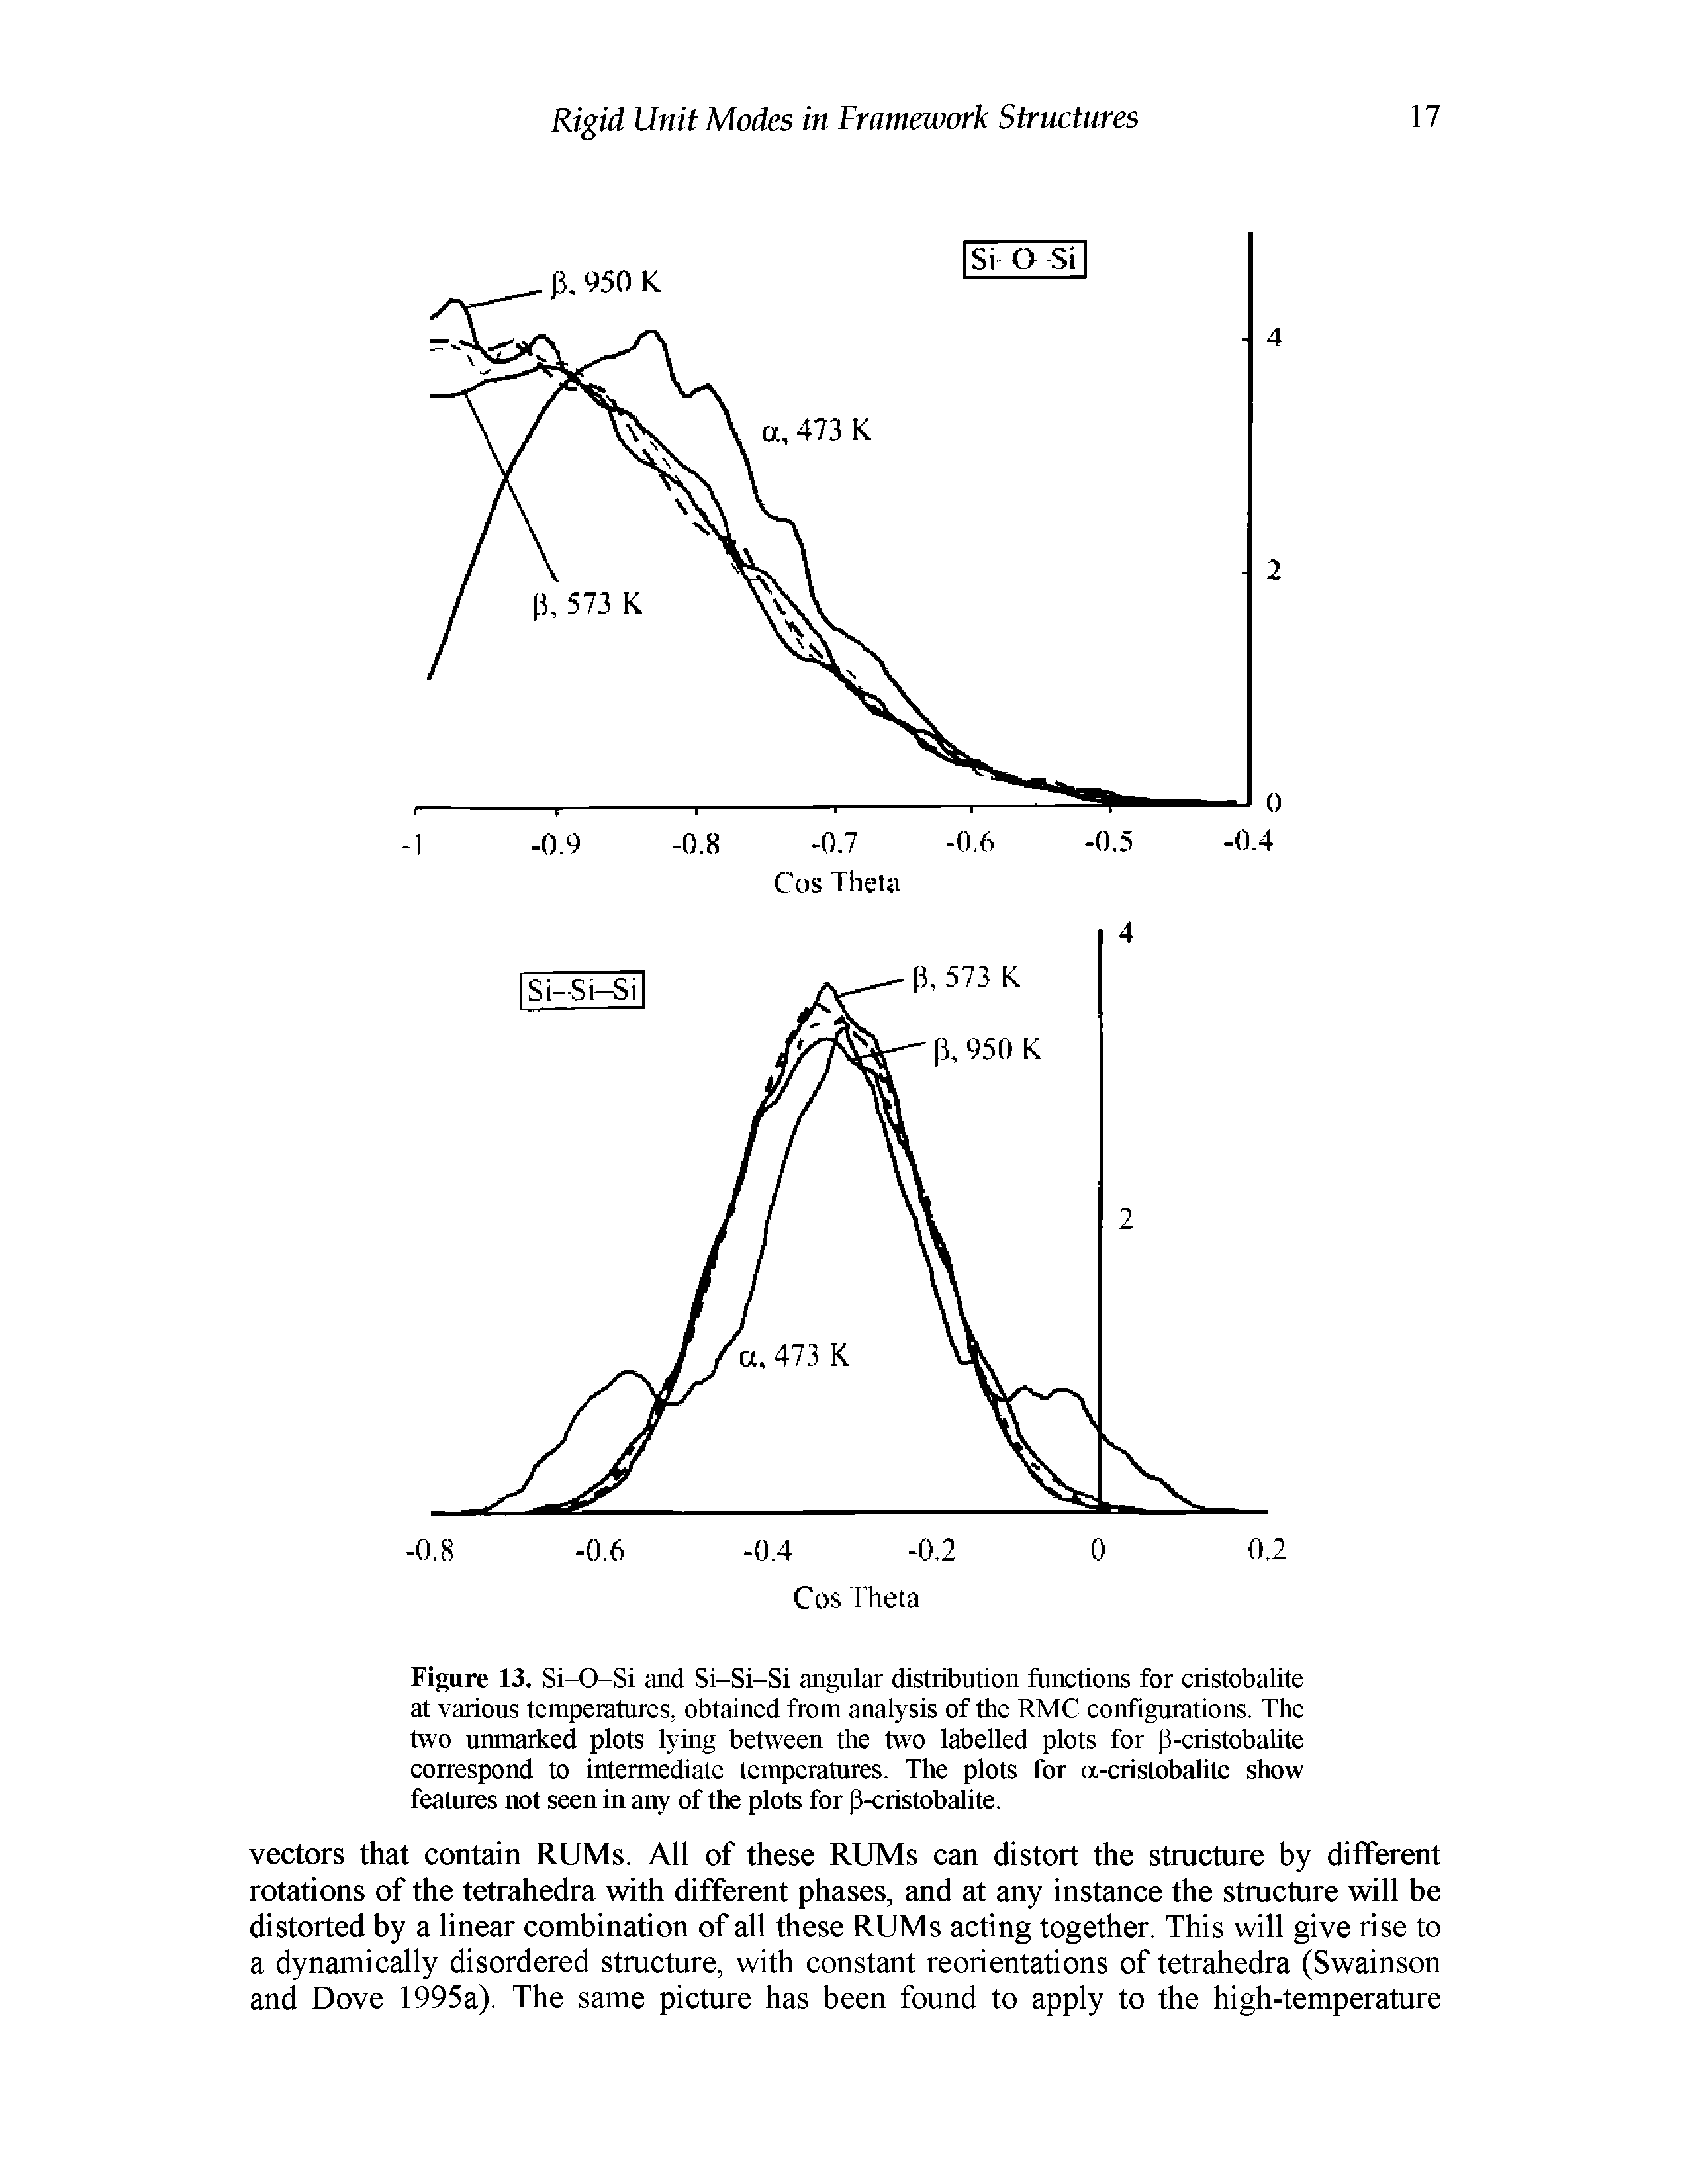 Figure 13. Si-O-Si and Si-Si-Si angular distribution functions for cristobalite at various temperatures, obtained from analysis of the RMC configurations. The two unmarked plots lying between the two labelled plots for p-cristobahte correspond to intermediate temperatures. The plots for a-cristobahte show features not seen in any of the plots for p-cristobalite.